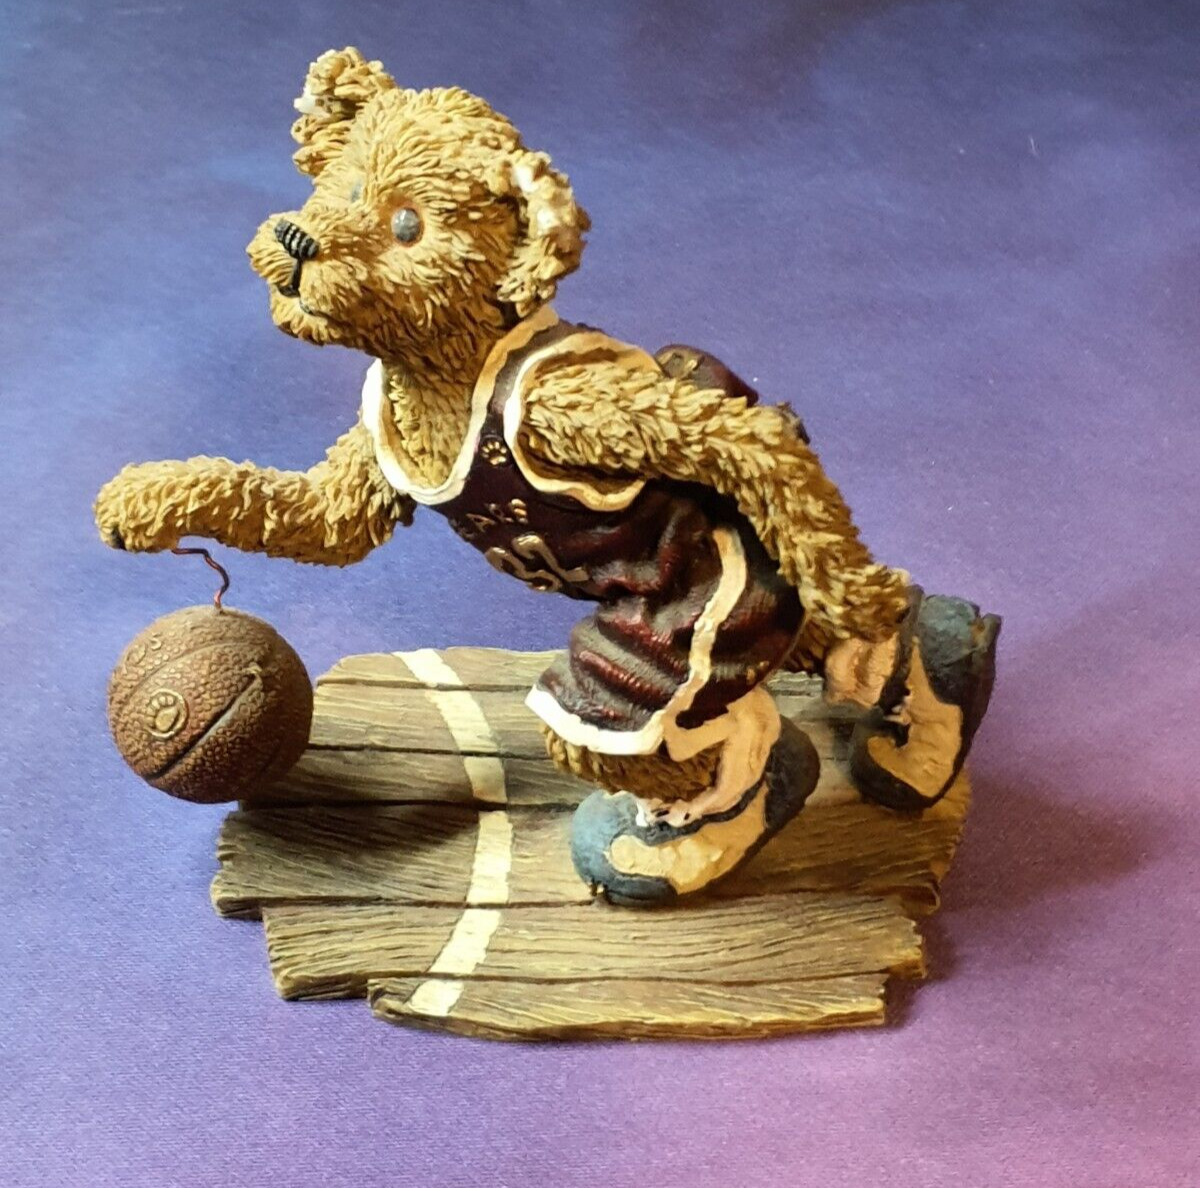 Basketball Figurine Boyds Bears & Friends The Bearstone Collection 2001 Dunker